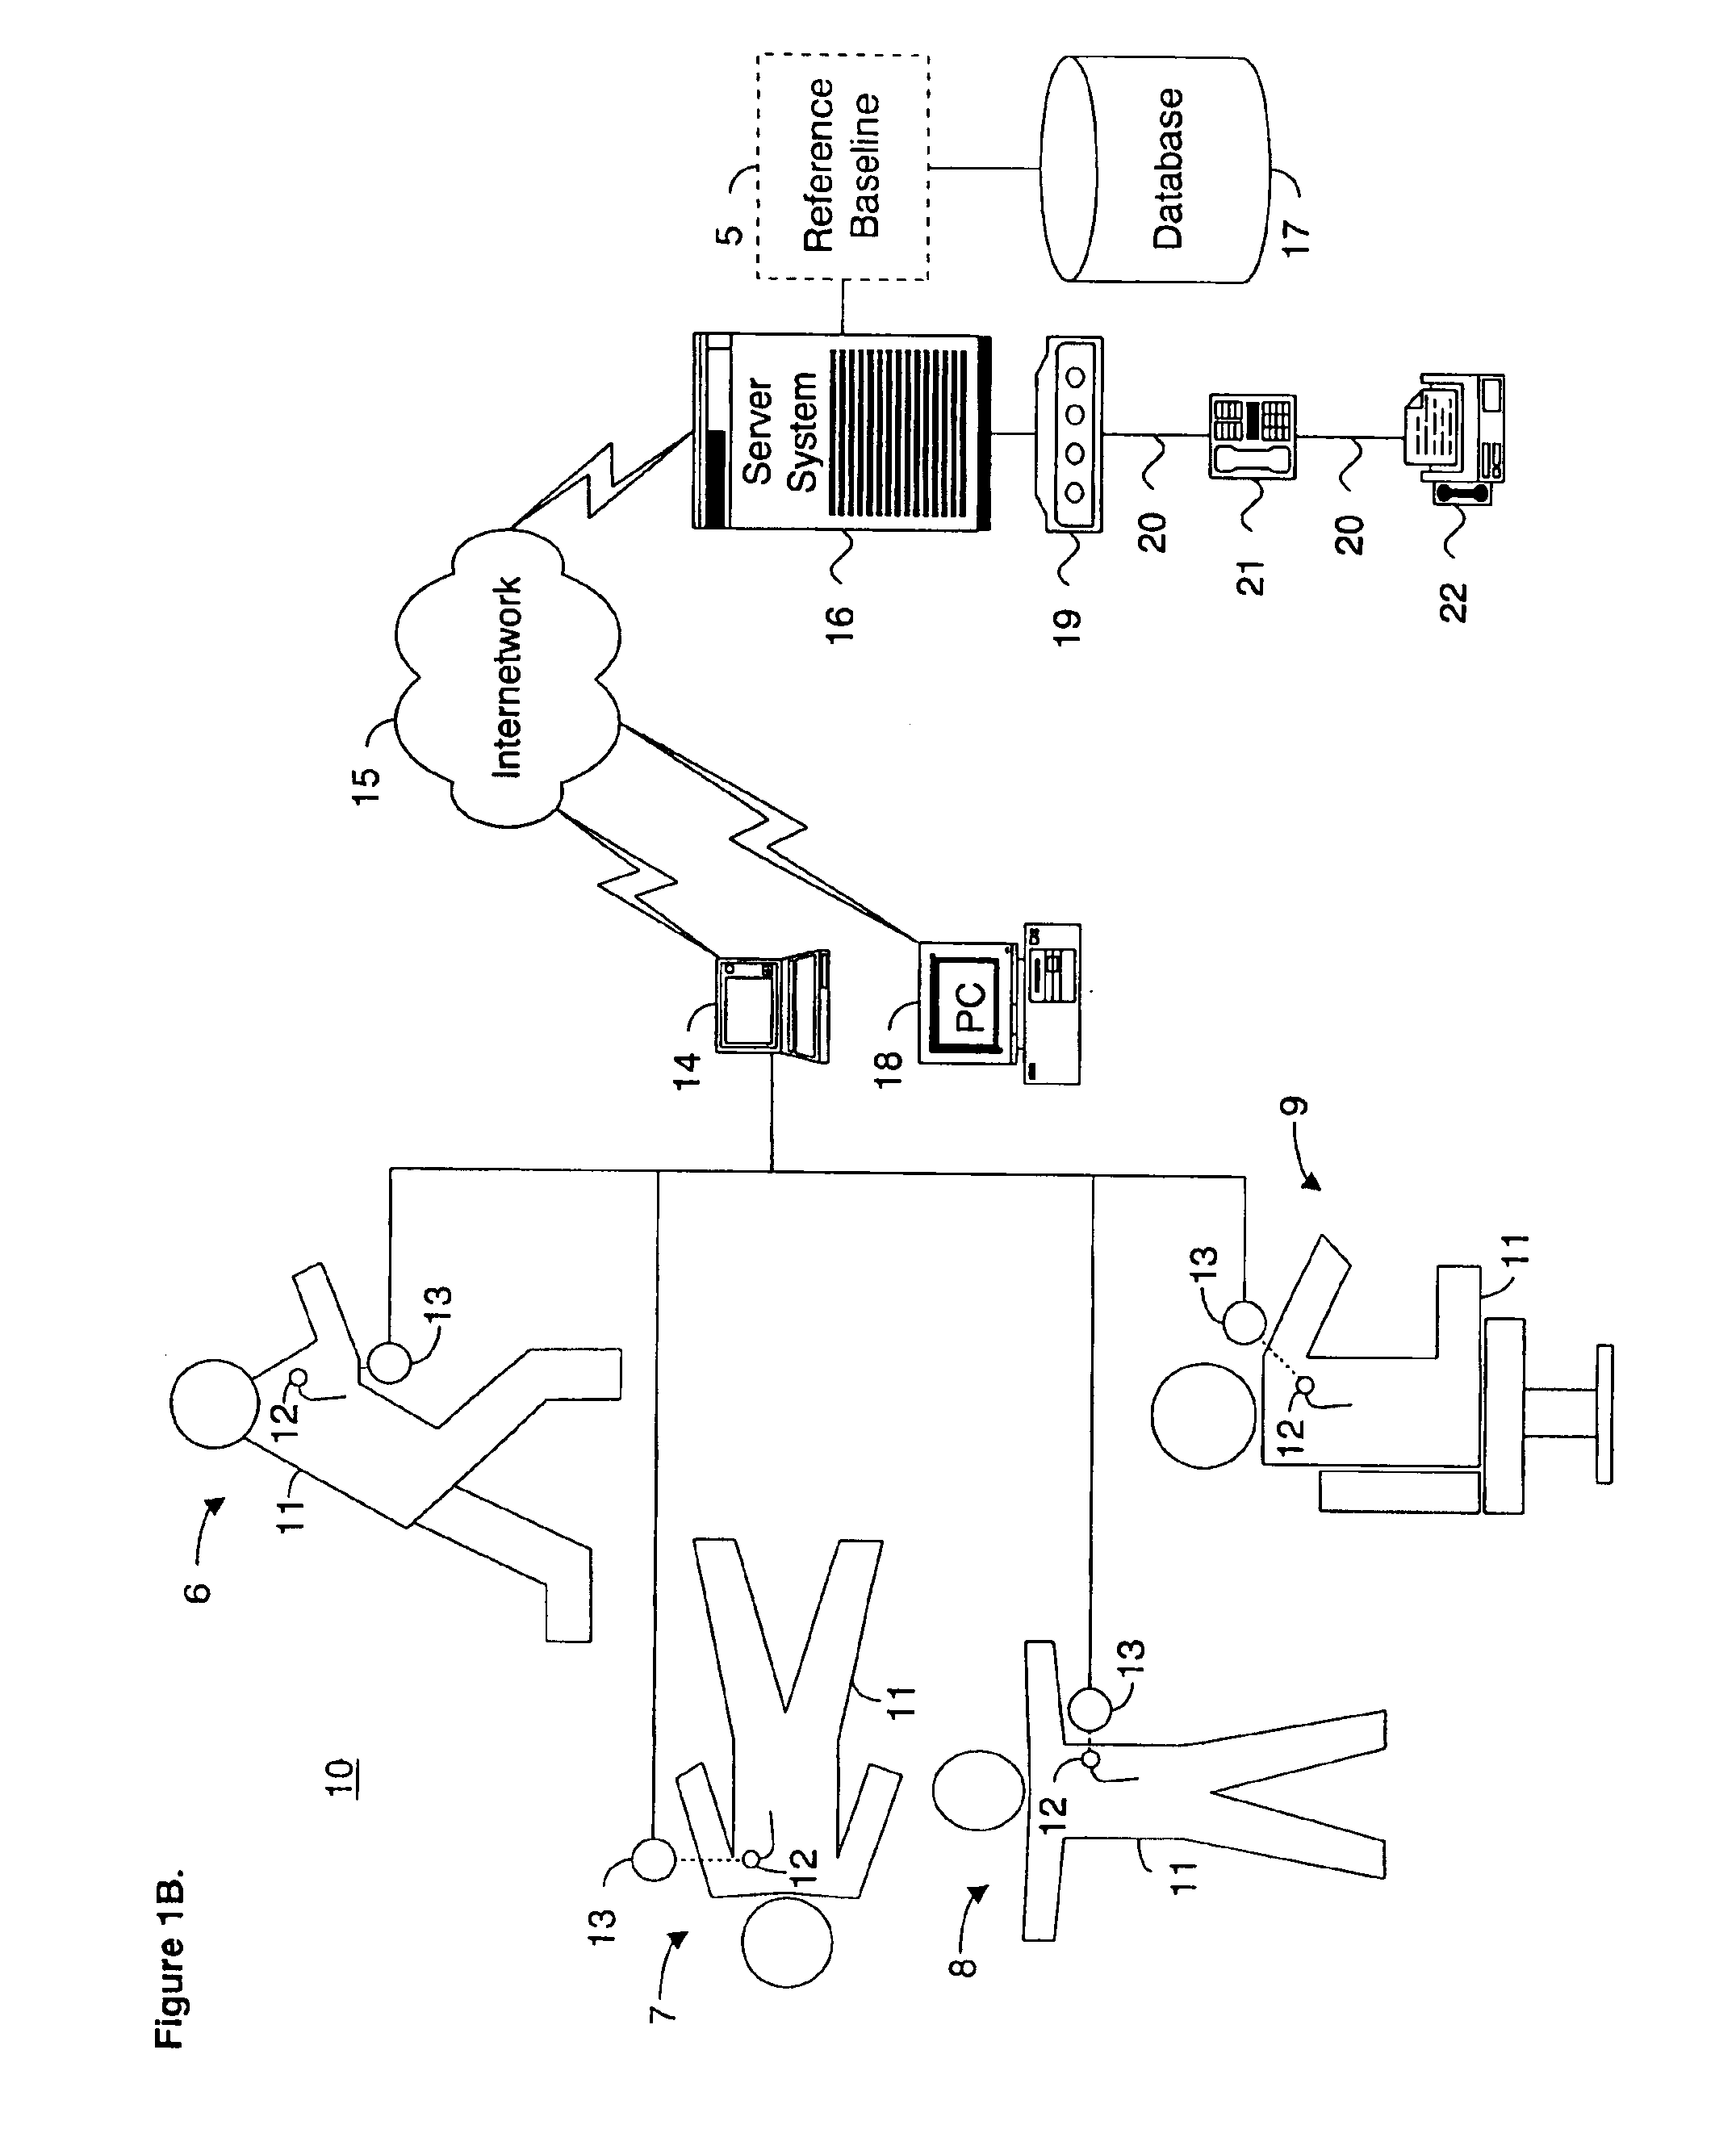 System and method for determining a reference baseline of patient information for automated remote patient care